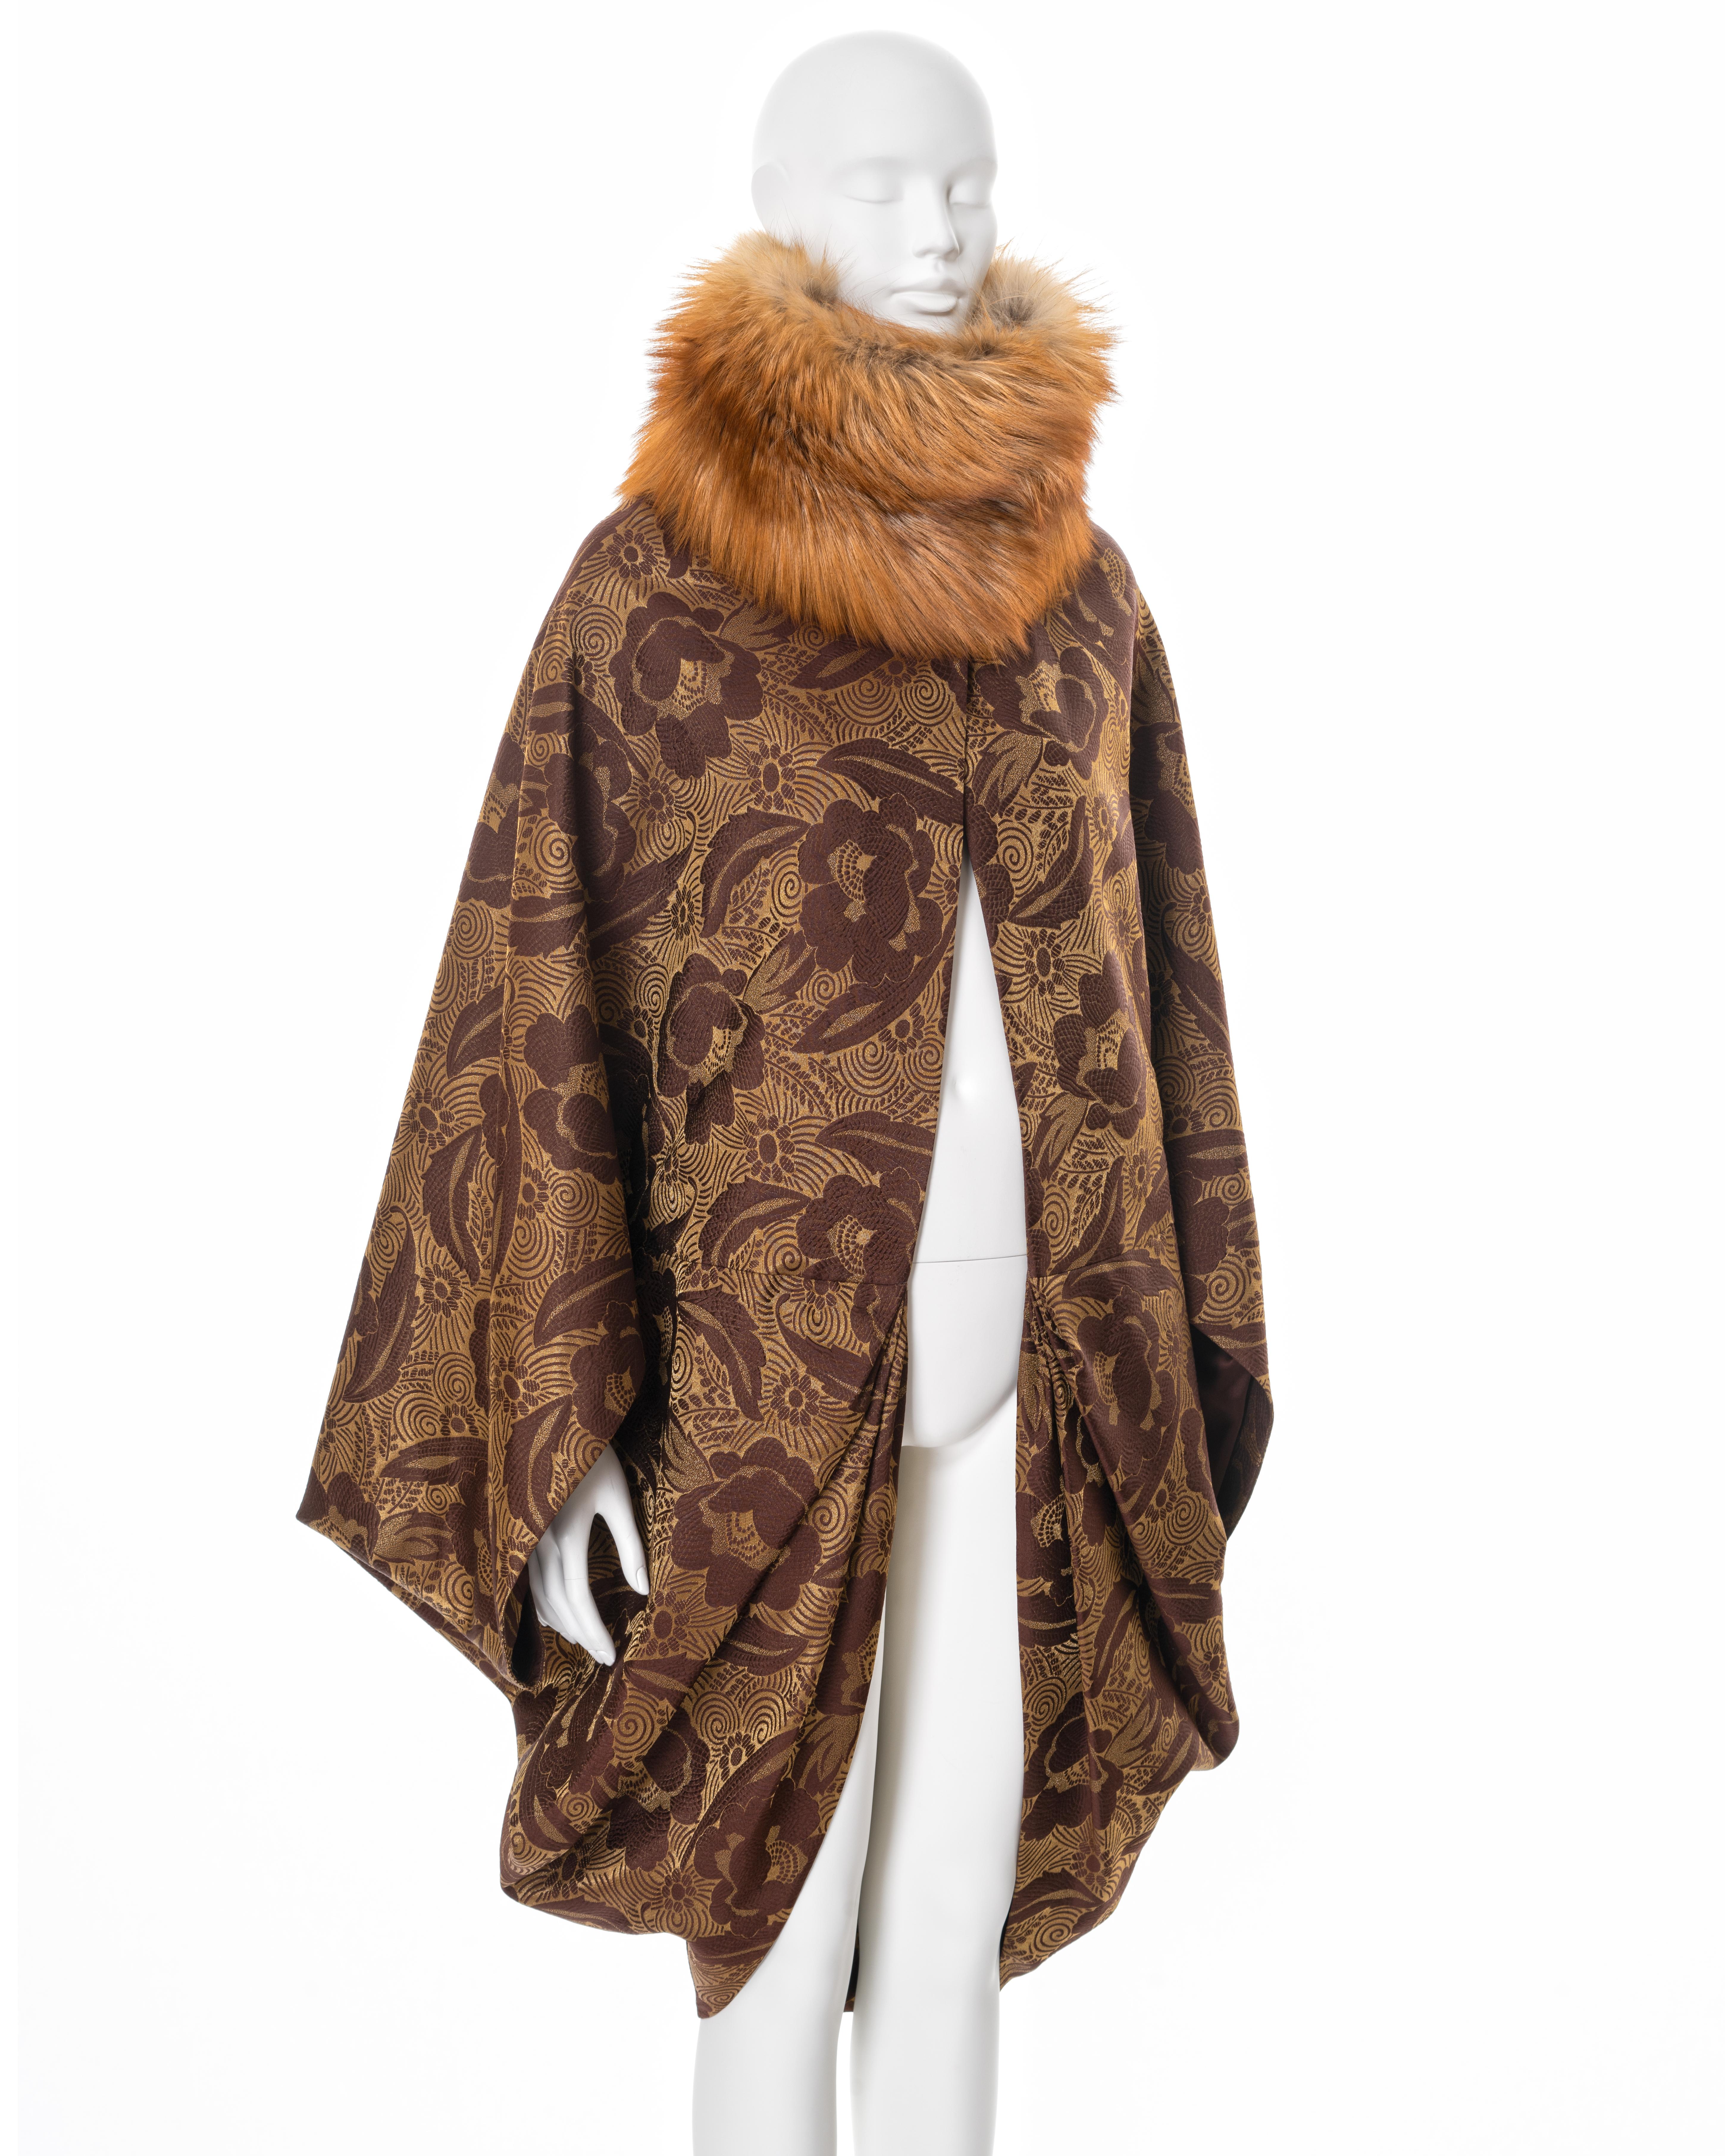 Women's Christian Dior by John Galliano silk cocoon coat with fox fur collar, ss 2008 For Sale